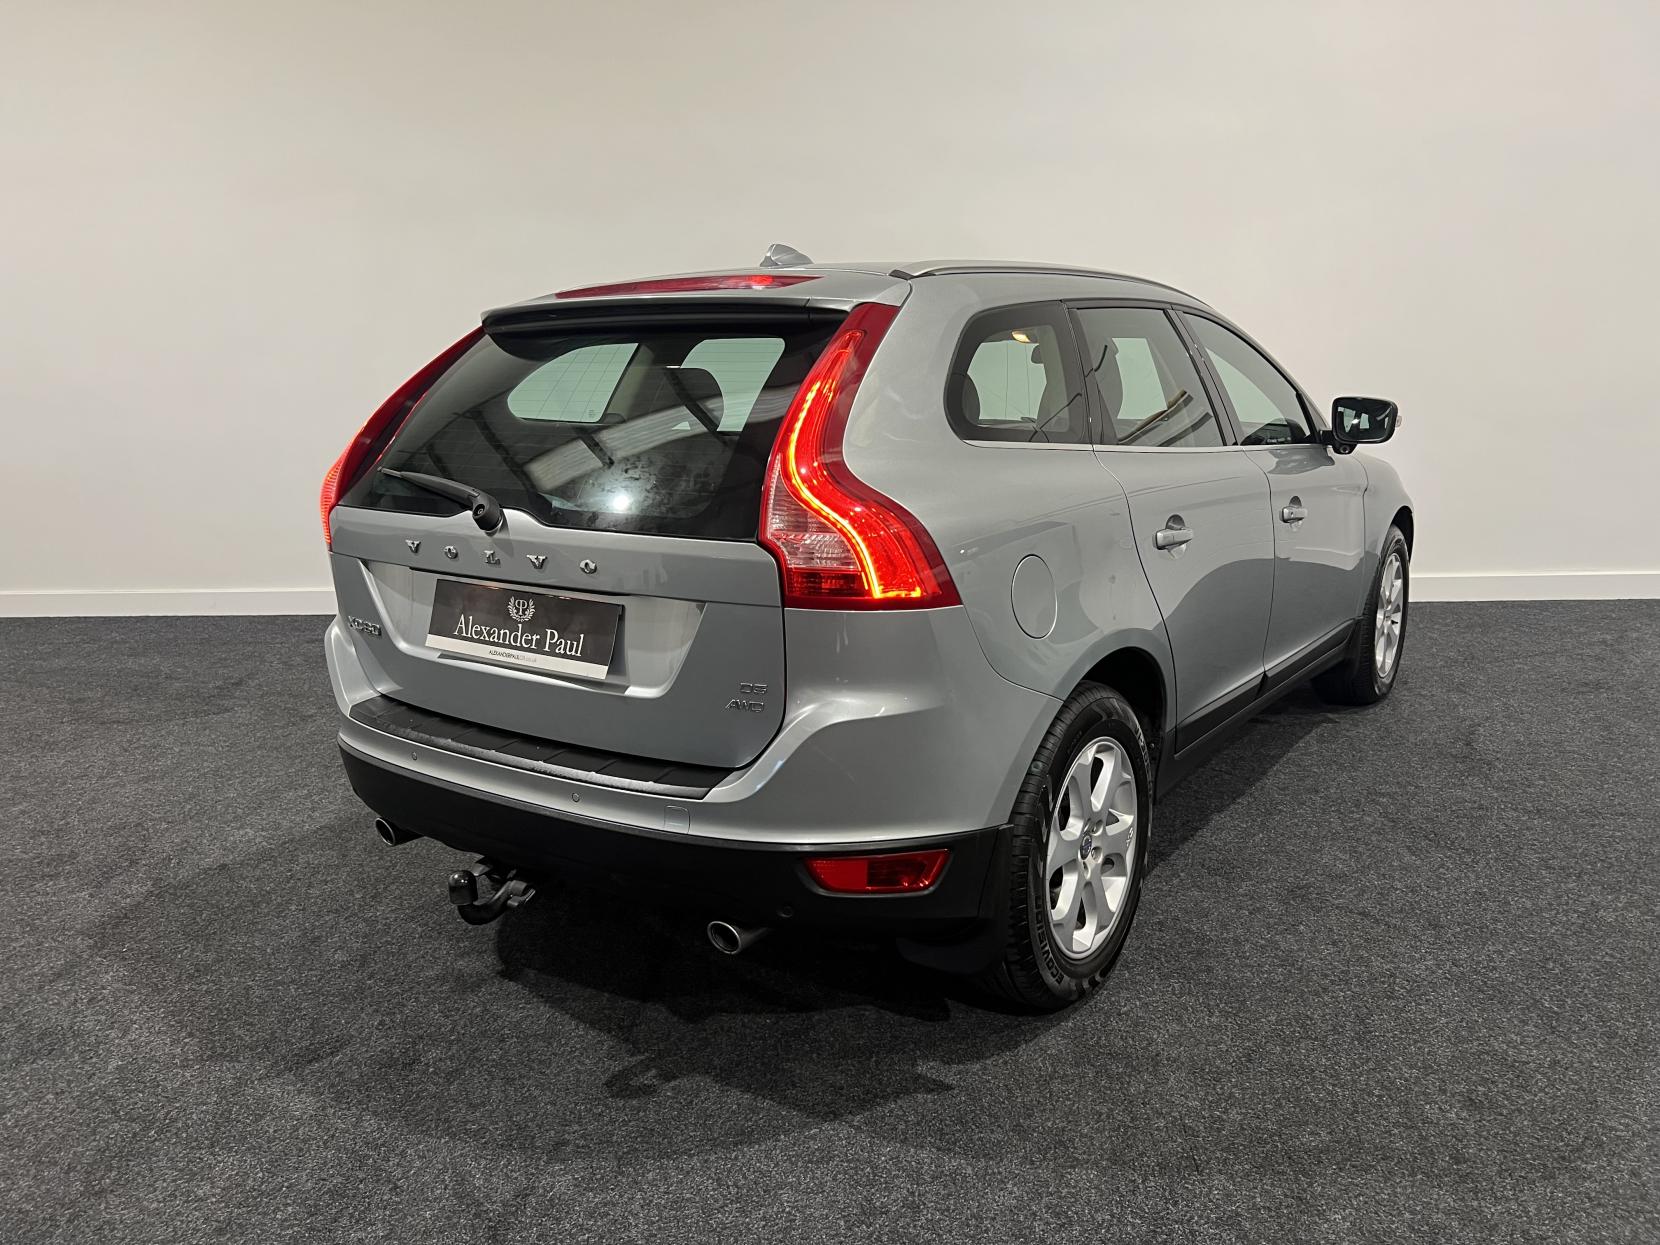 Volvo XC60 2.4 D5 SE Lux SUV 5dr Diesel Manual AWD Euro 4 (205 ps)